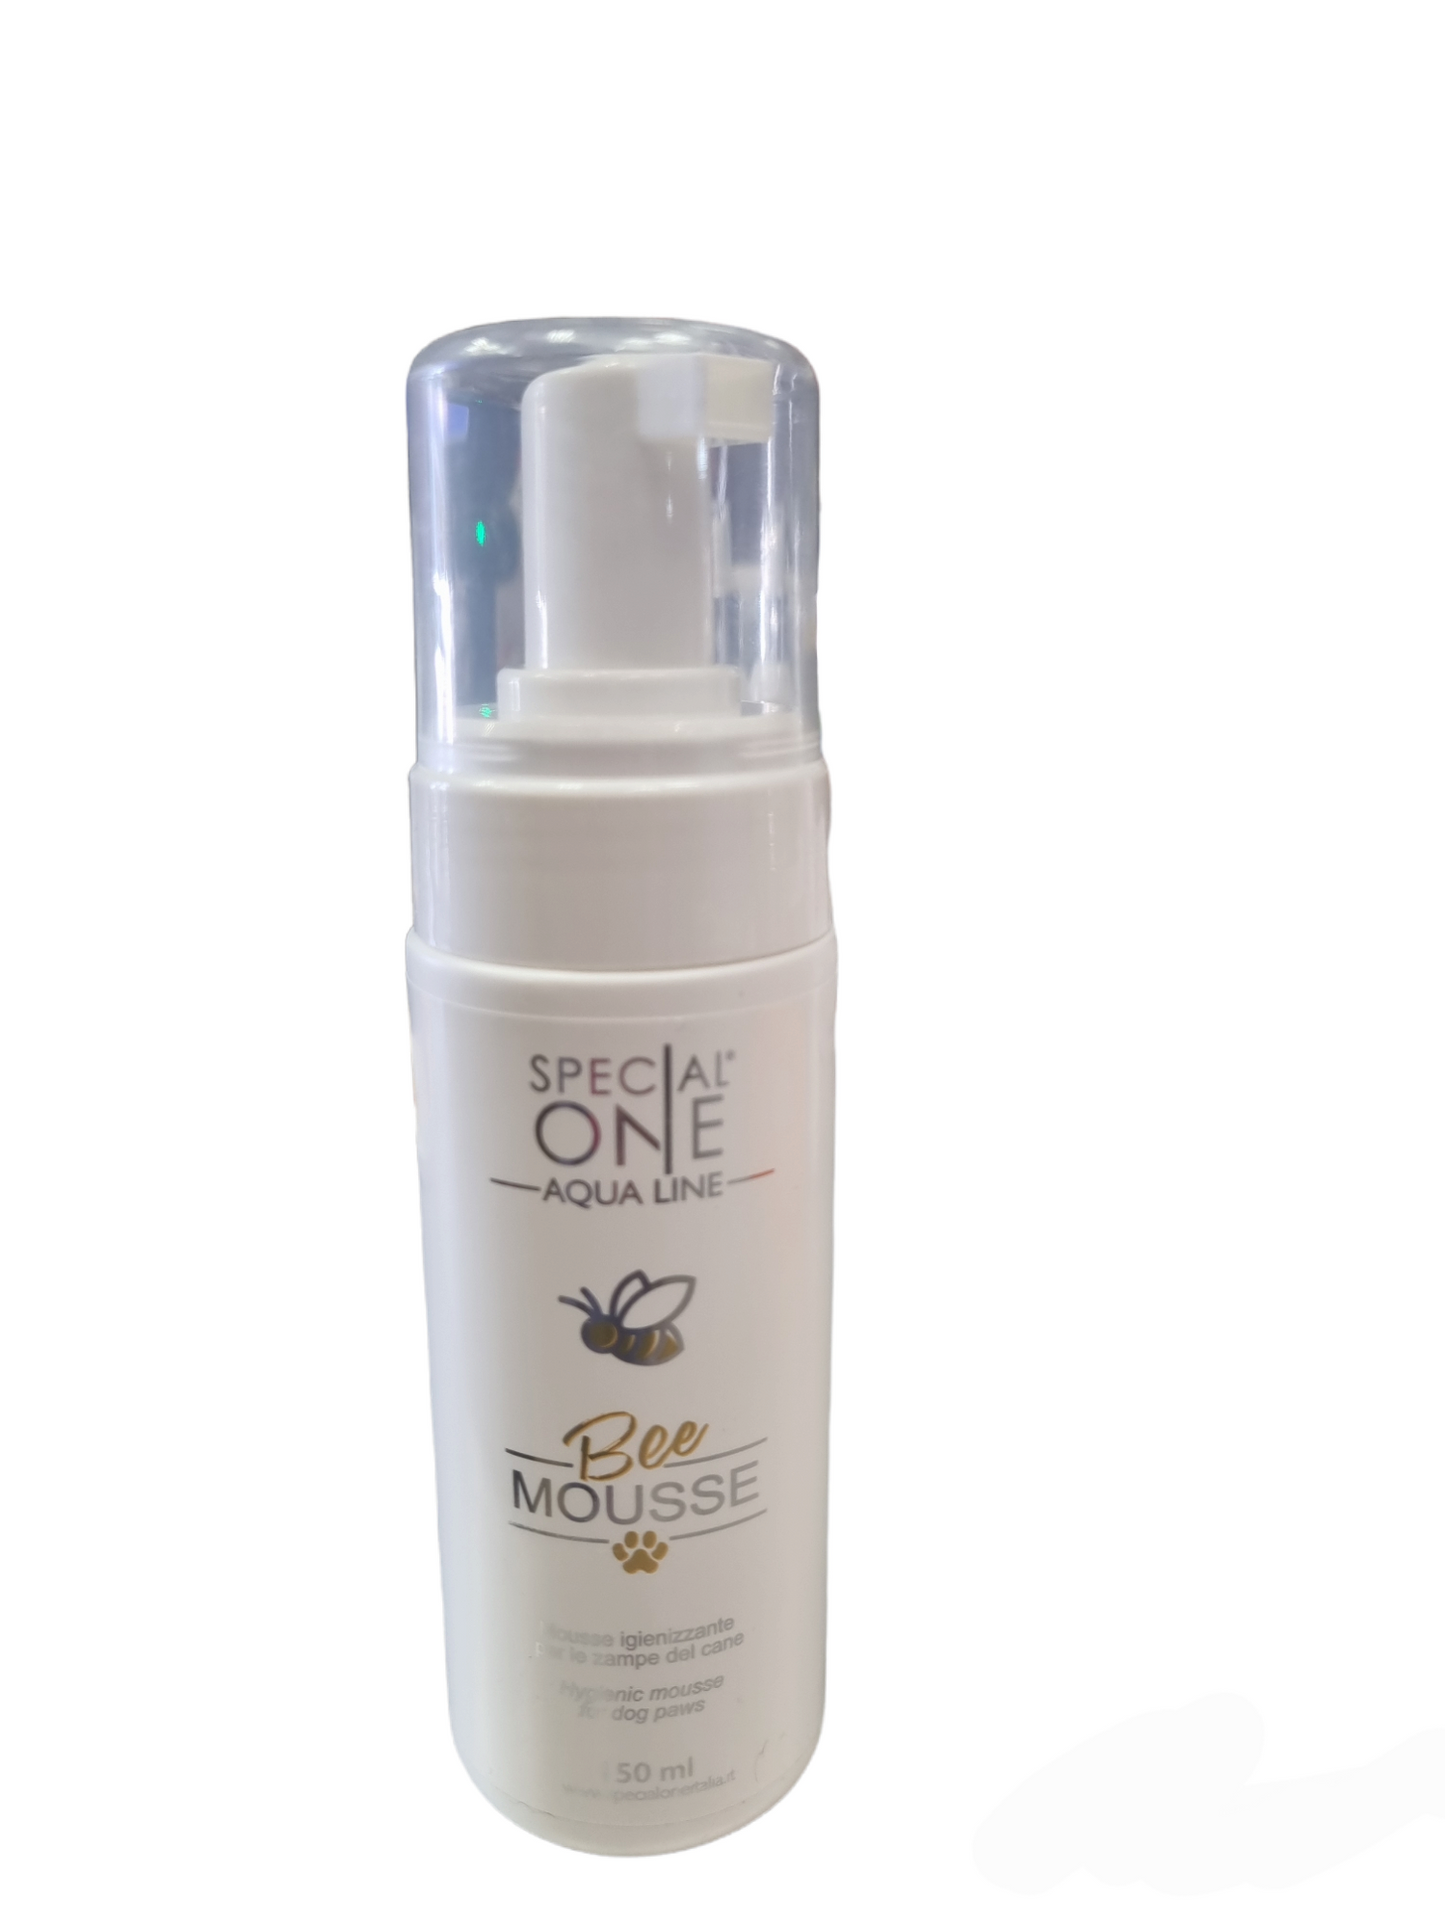 Special One Aqua Line Bee Mousse 150ml